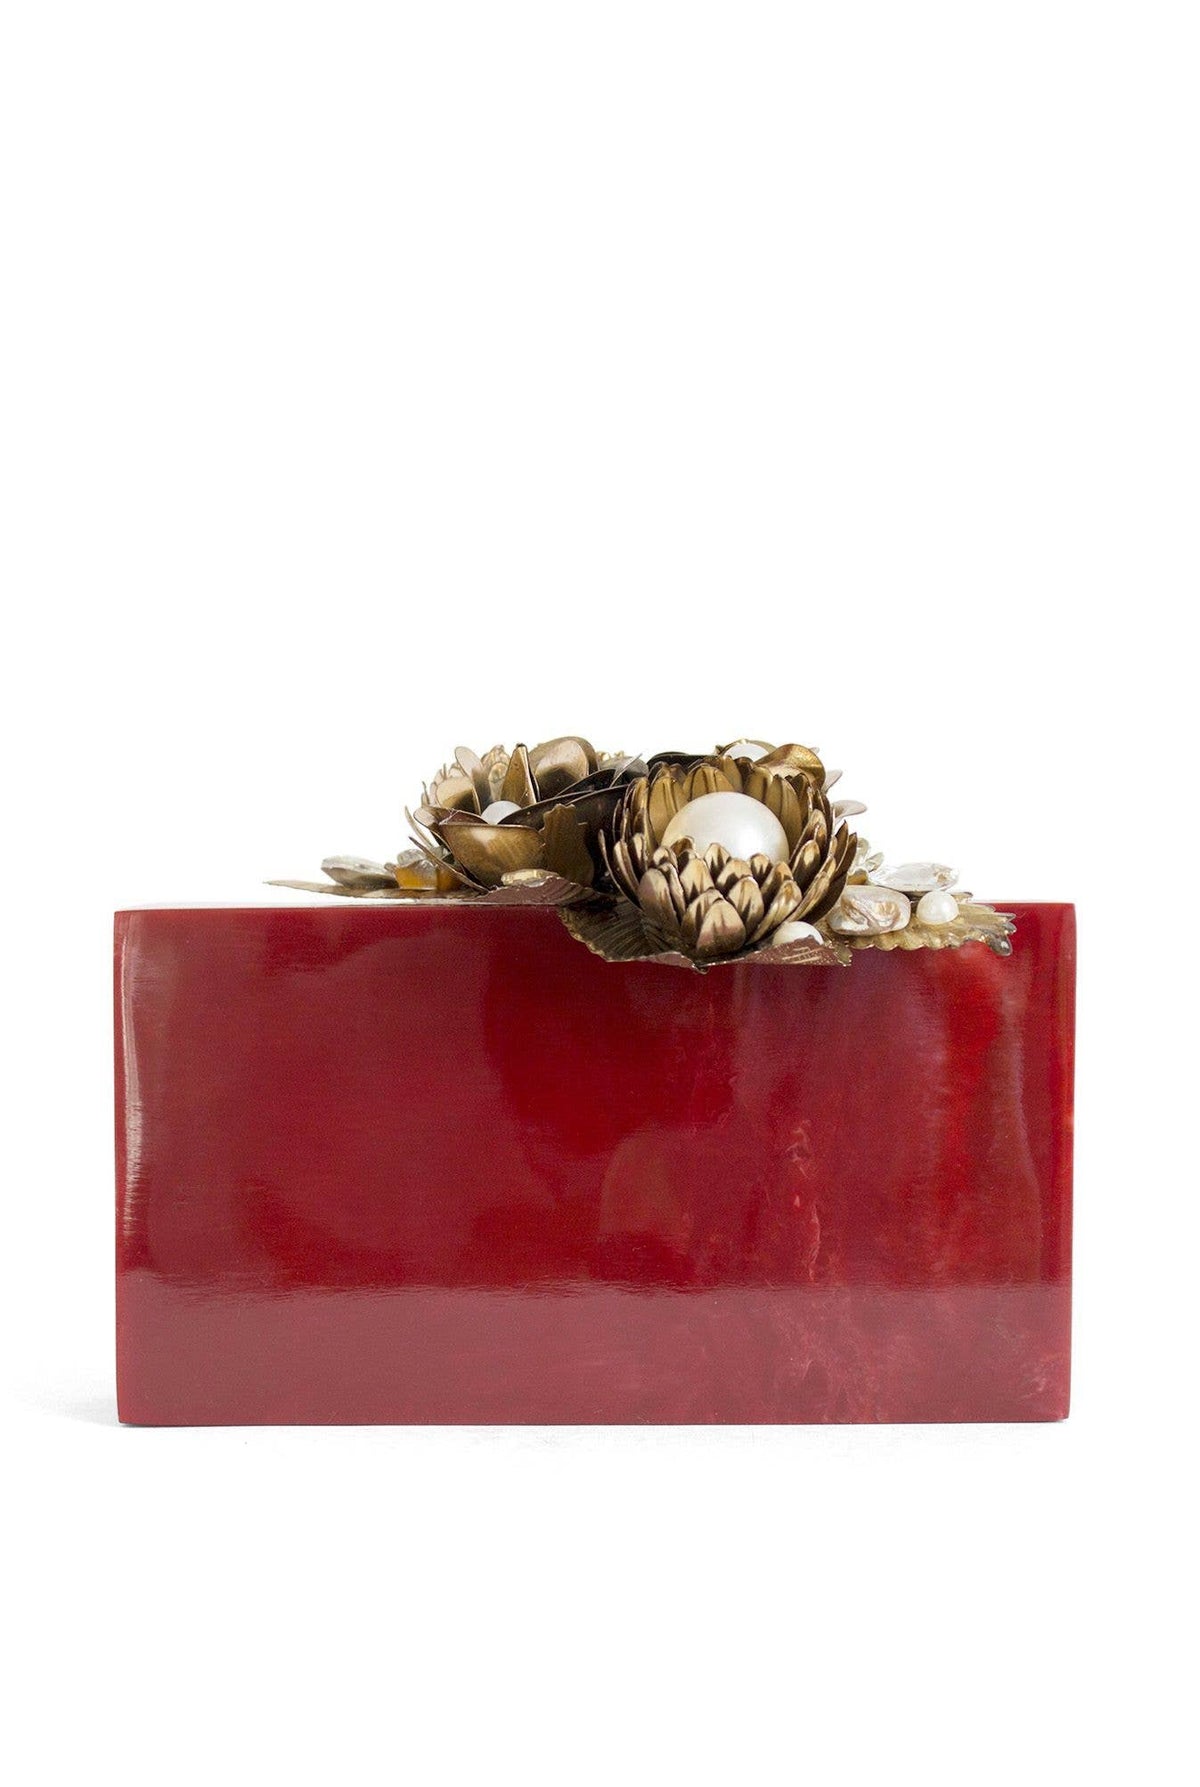 Red and Gold Rose Clutch | Equal Hands